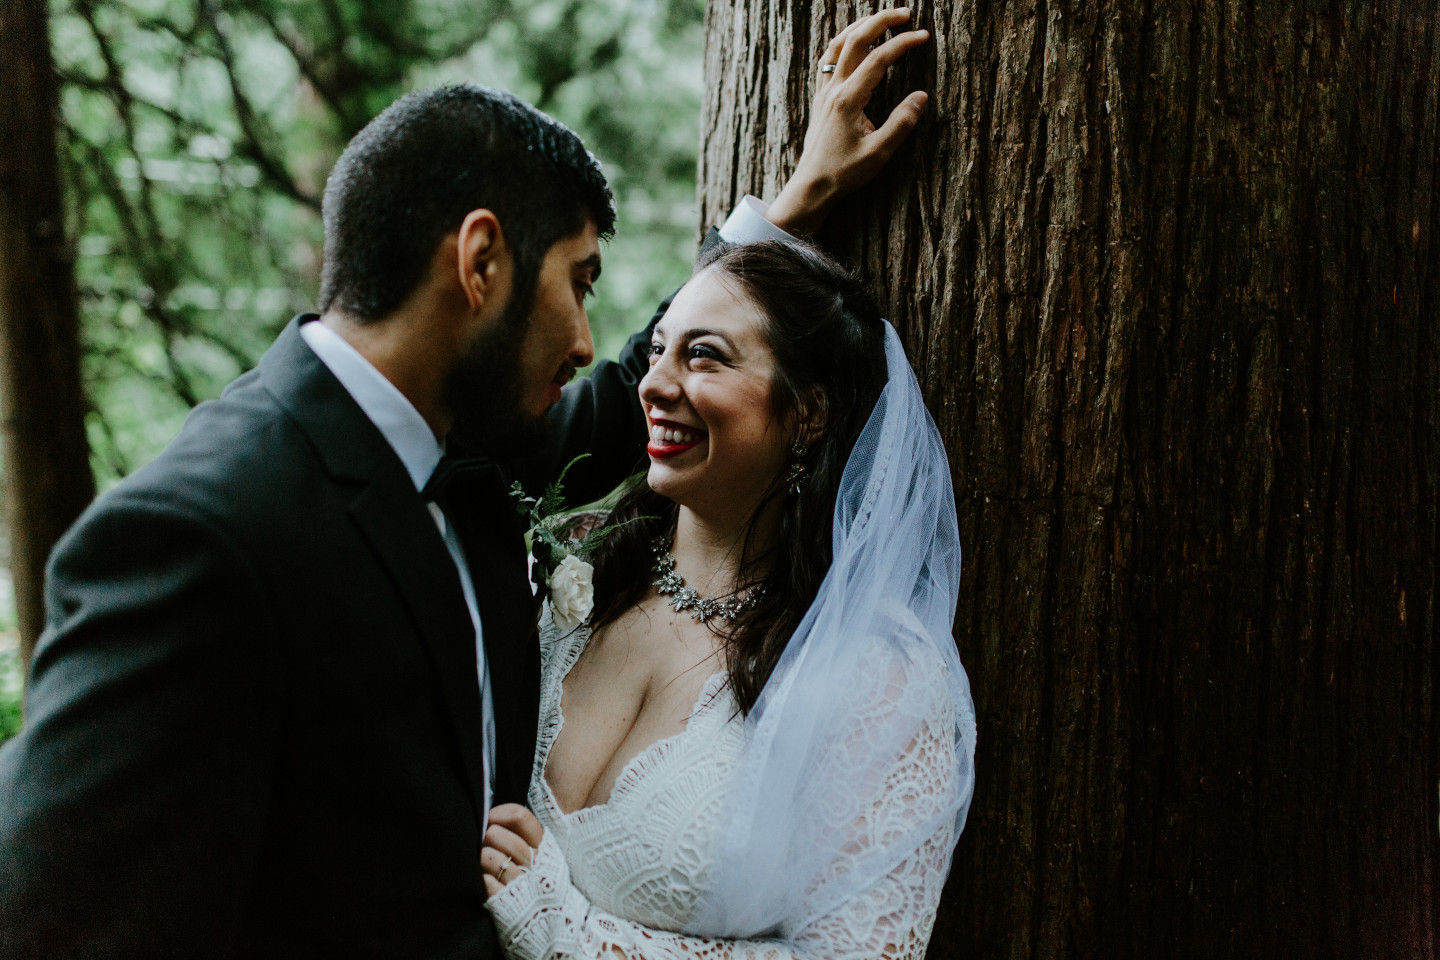 Sarah and Sam share a moment under a tree at Skamania House, Washington. Elopement photography in Portland Oregon by Sienna Plus Josh.